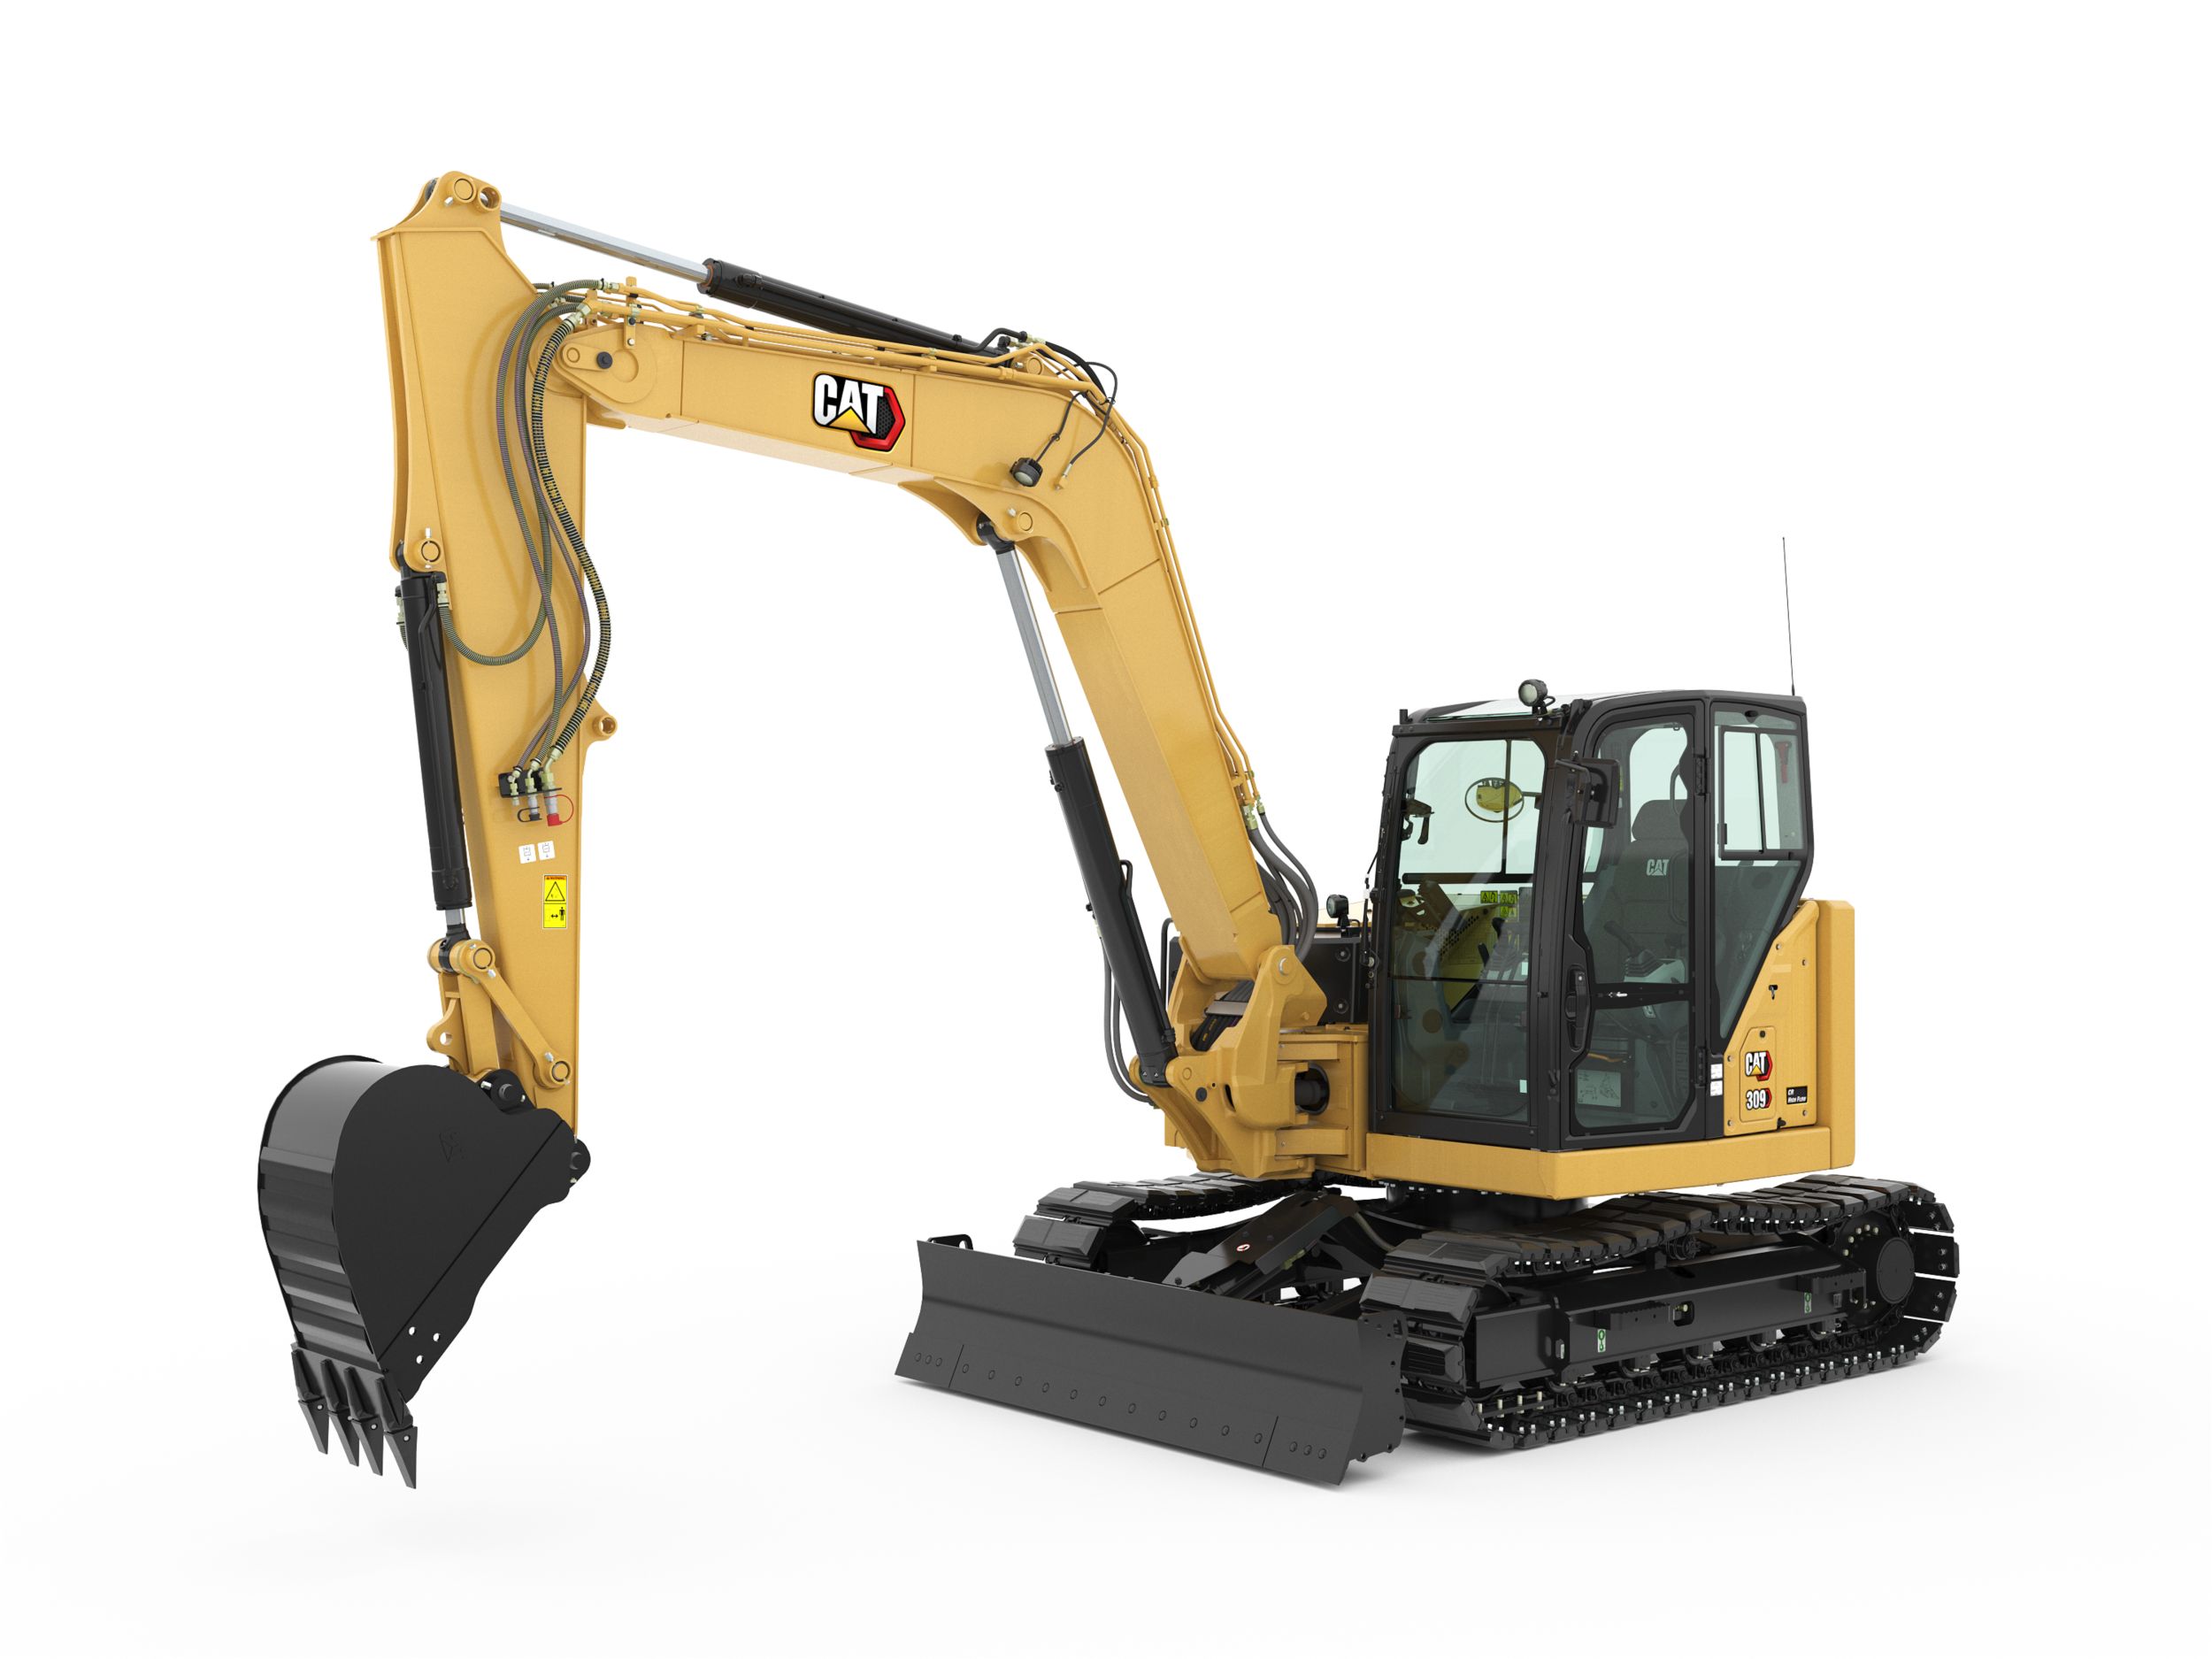 XBoom - Mount Skid Steer Attachments On Your Mini Excavator